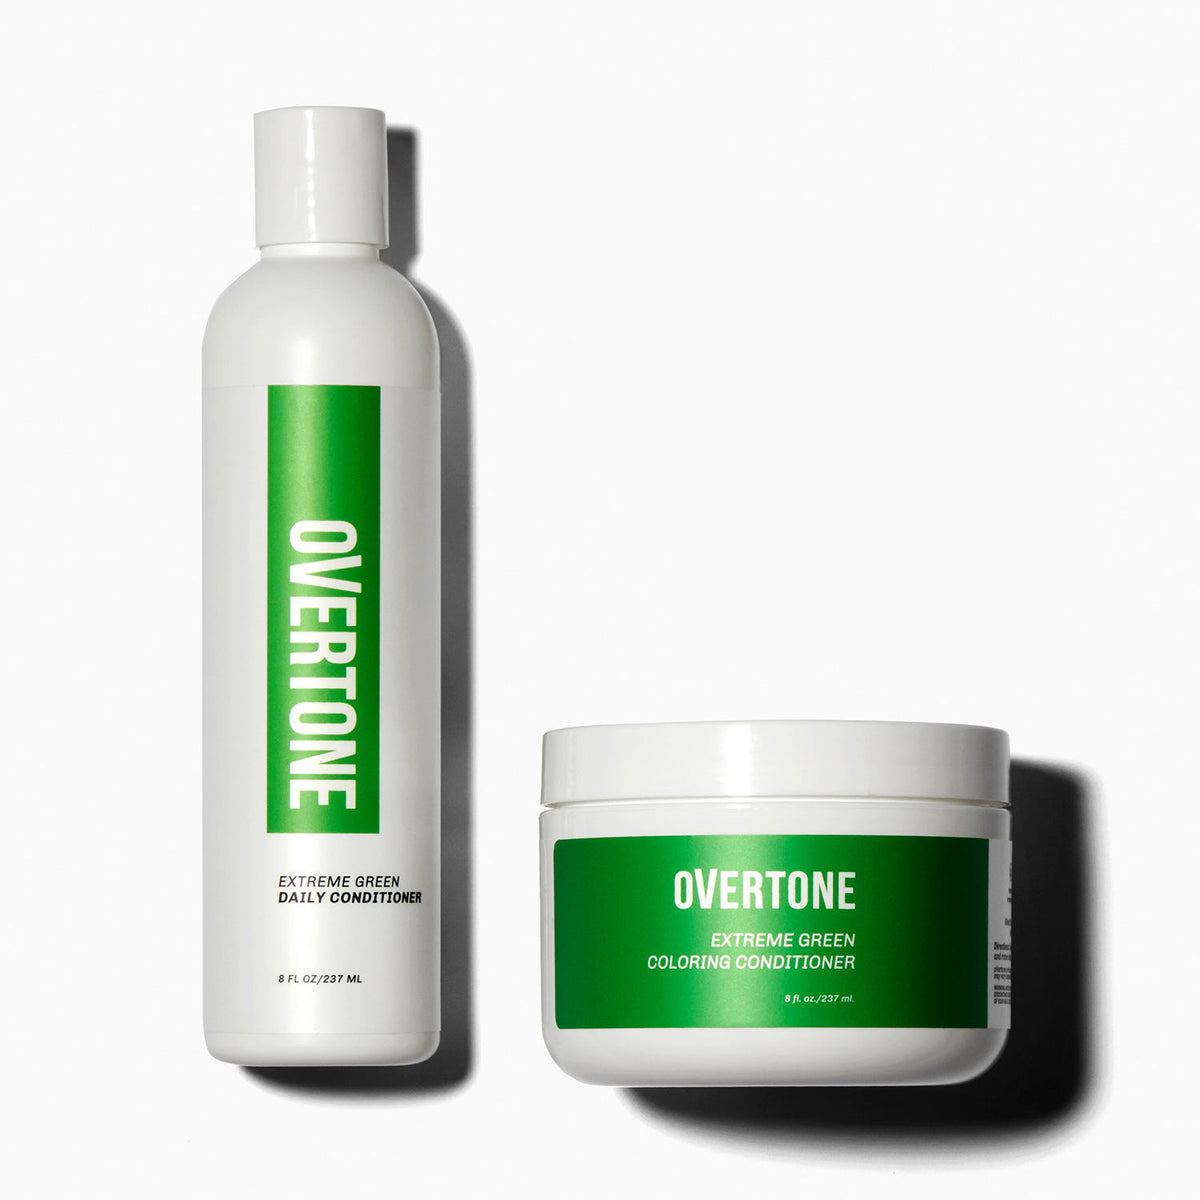 oVertone Extreme Green Coloring Conditioner and Daily Conditioner